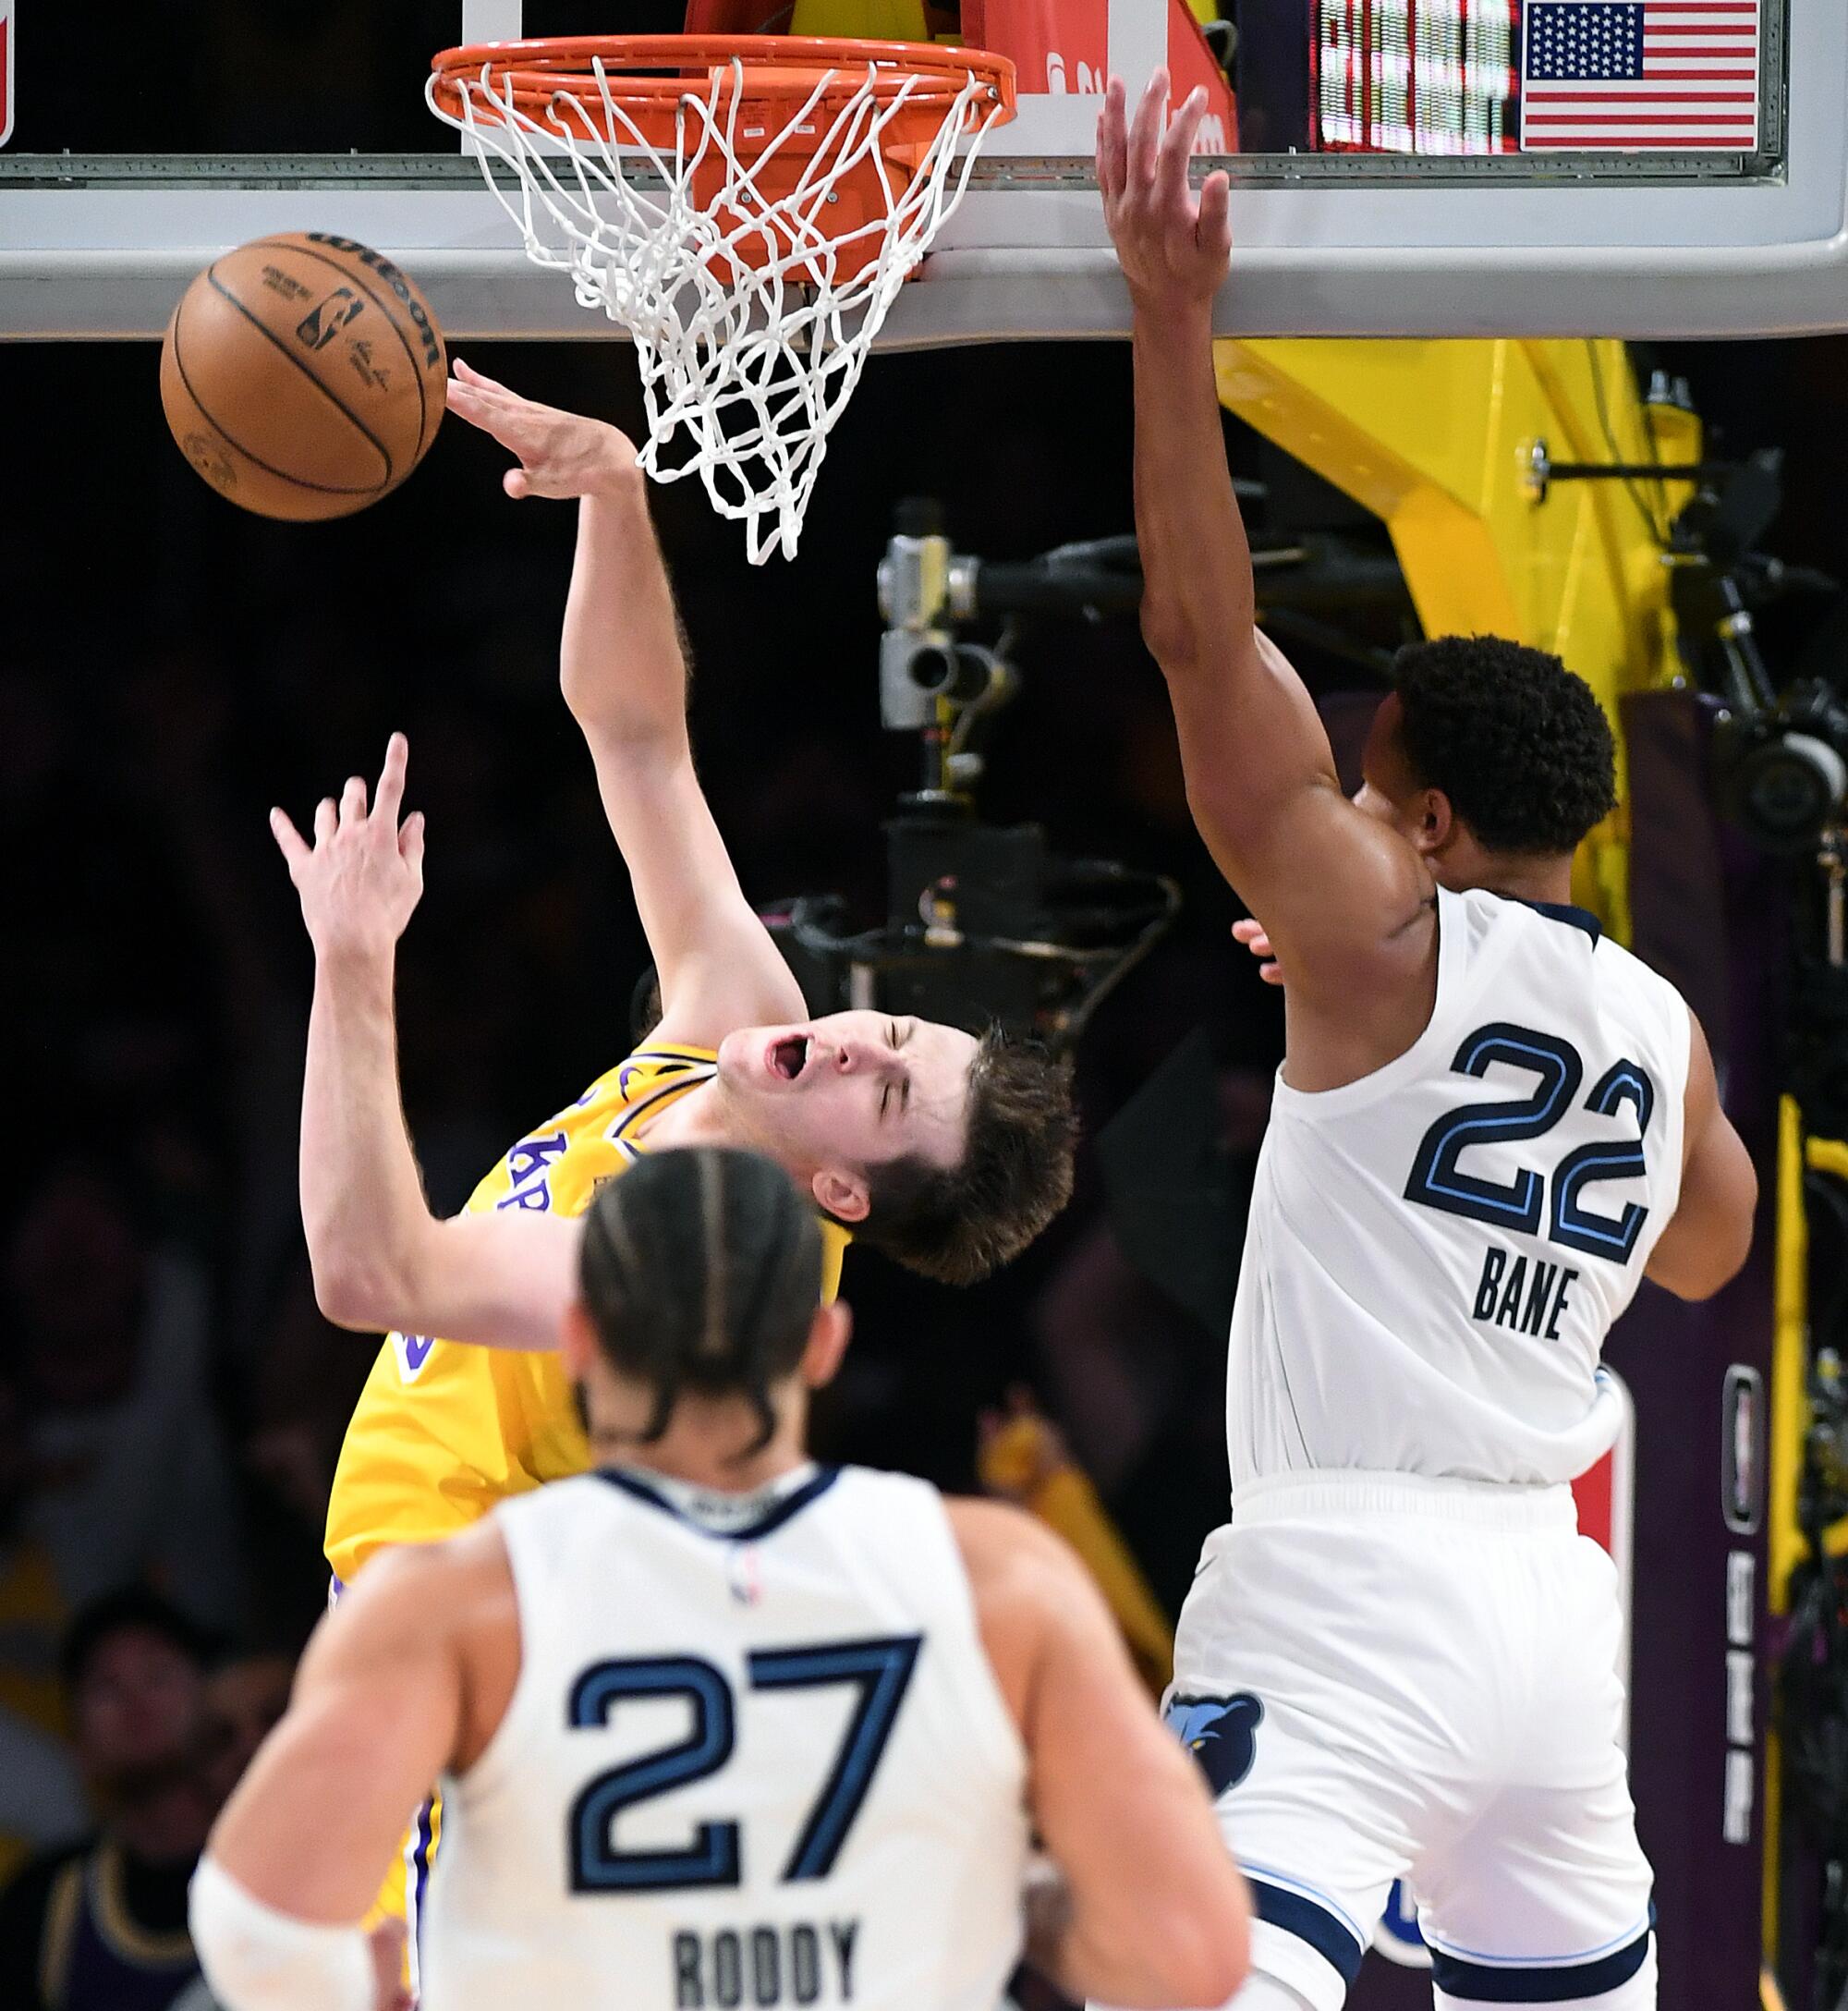 Lakers guard Austin Reeves is fouled by Grizzlies guard Desmond Bane in the second quarter.